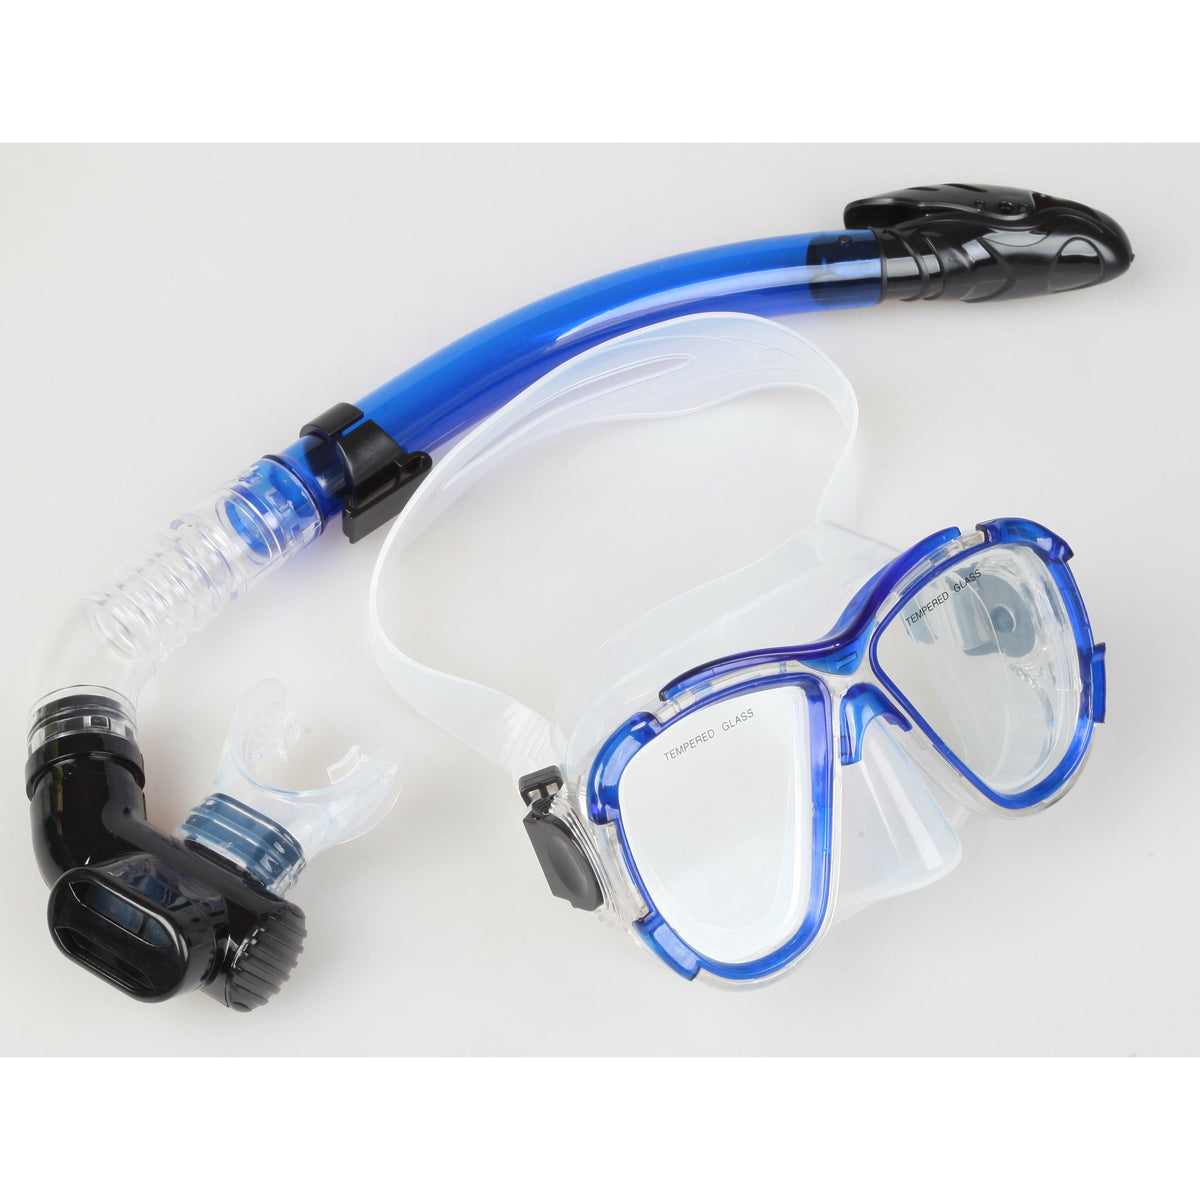 Adult Snorkeling Swimming Diving Mask &amp; Snorkel - Quality Tempered Glass